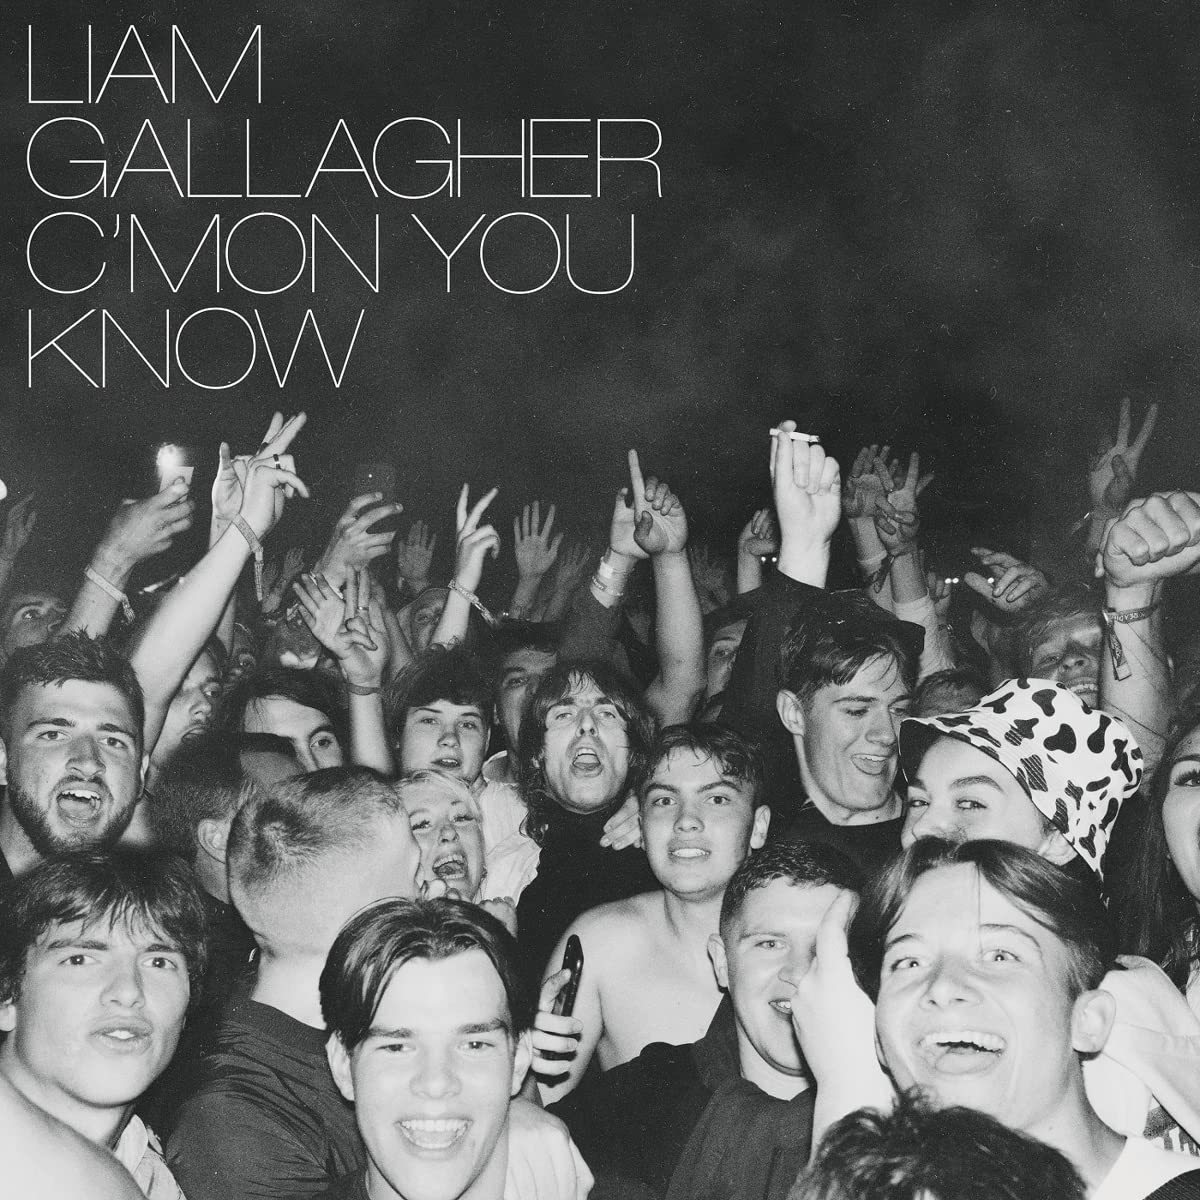 Liam Gallagher C'mon You Know review